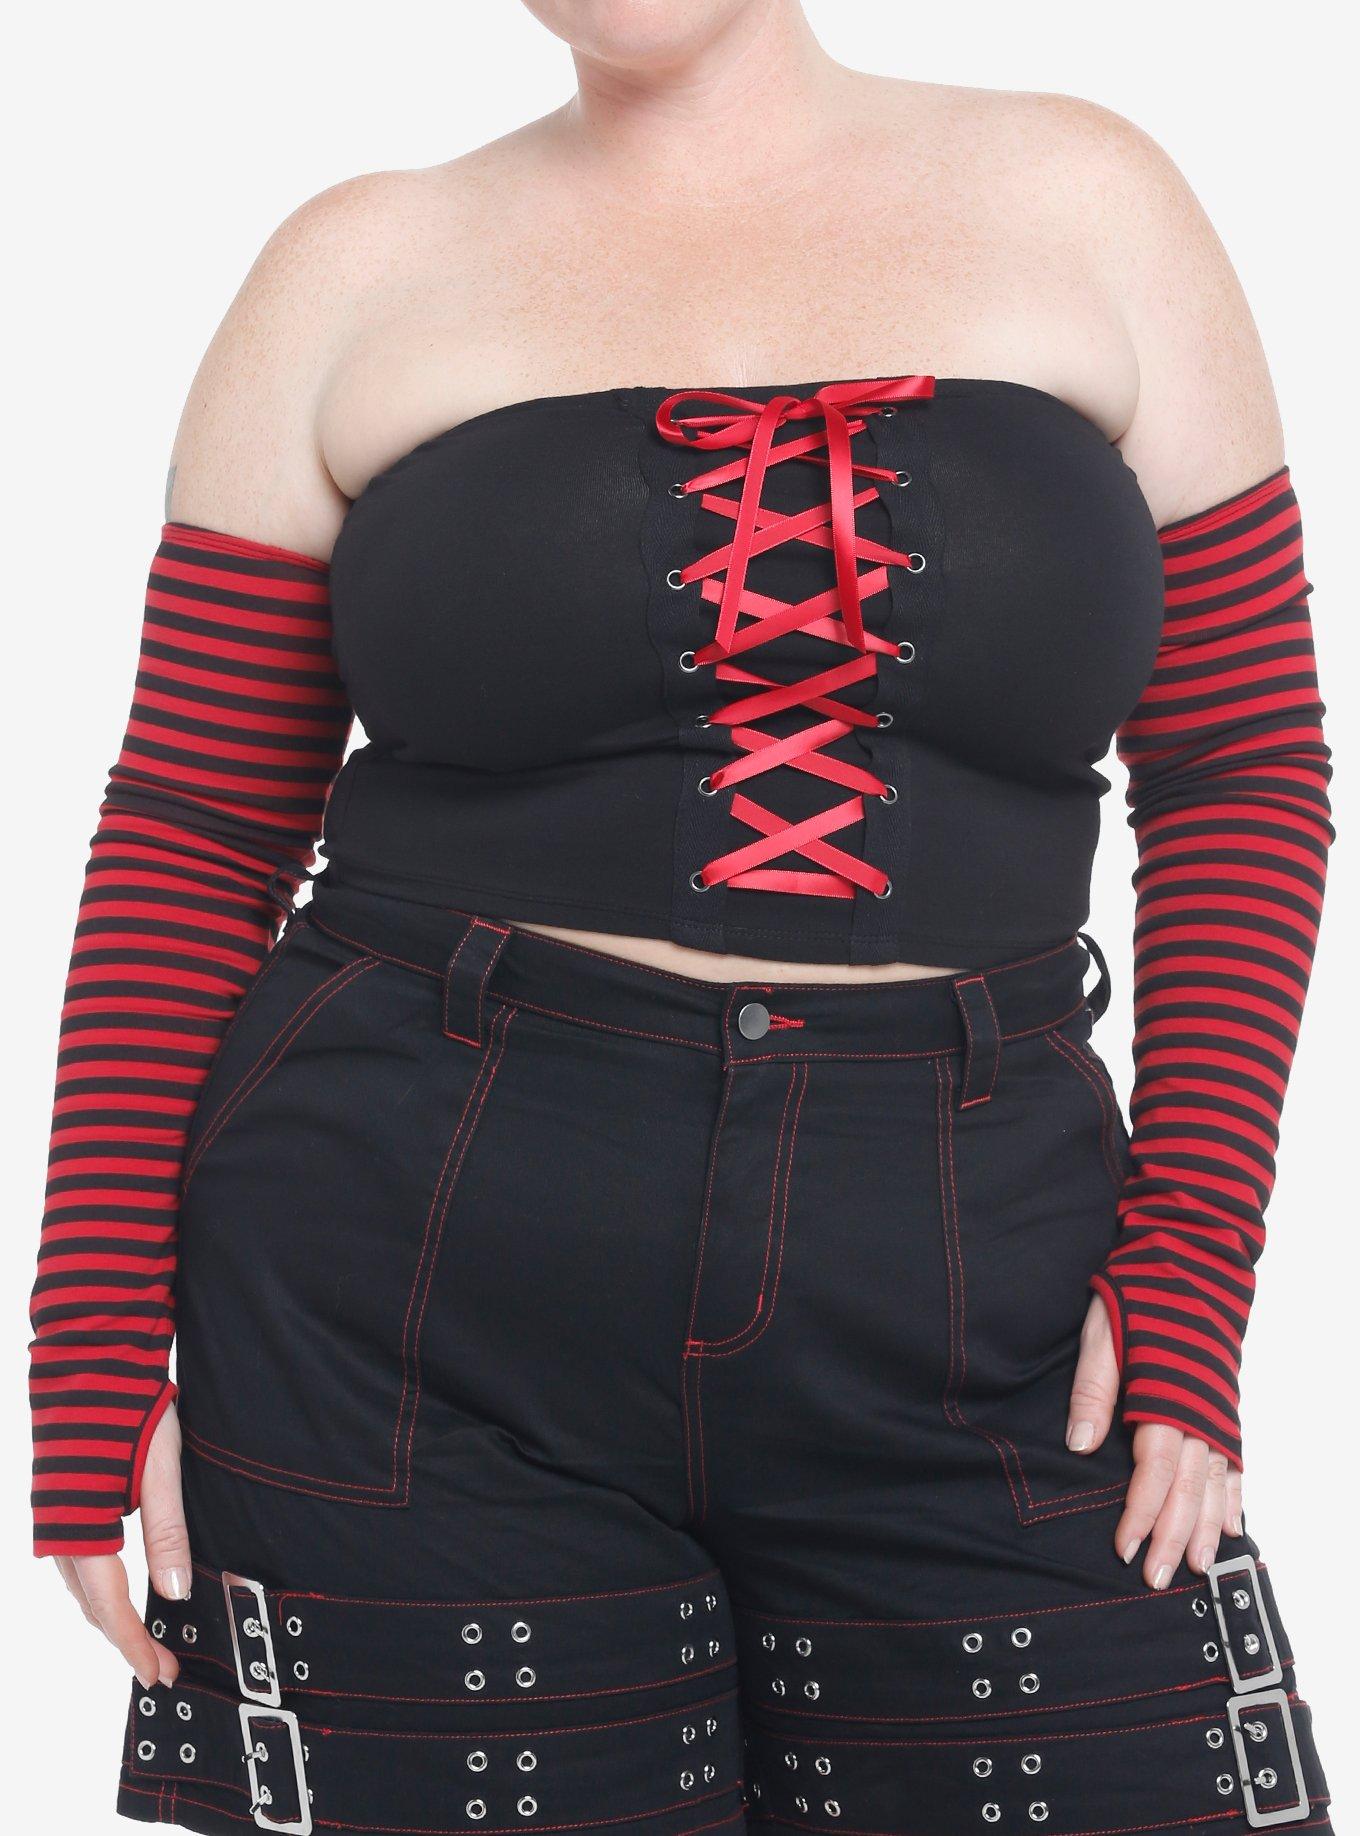 Red & Black Tube Stripe Arm Warmers Plus Size | Topic